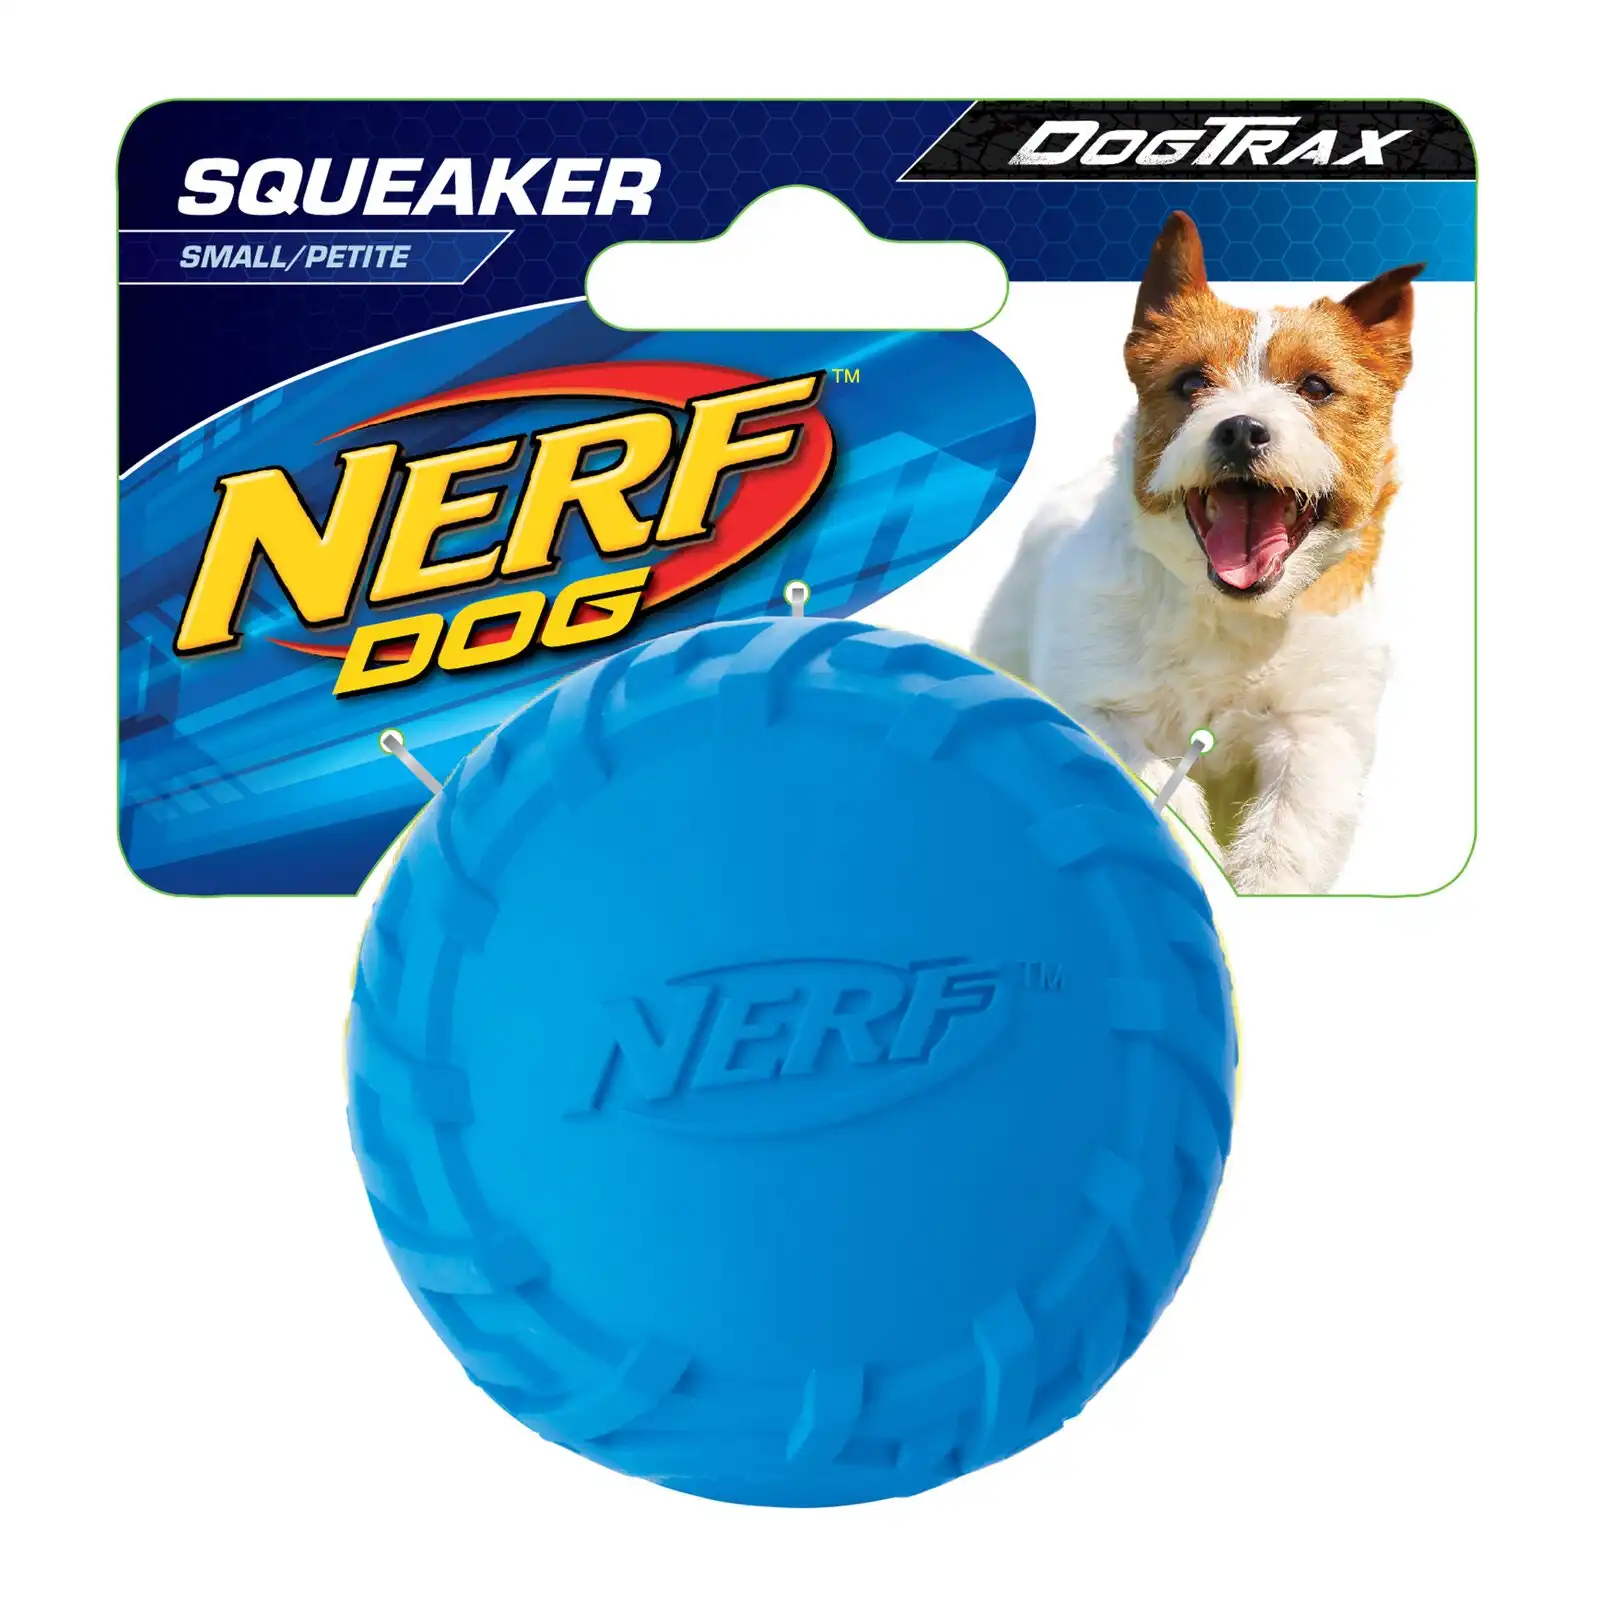 Nerf Dog 2.5" Small Tire Squeak Ball Interactive Rubber Textured Small Dog Toy